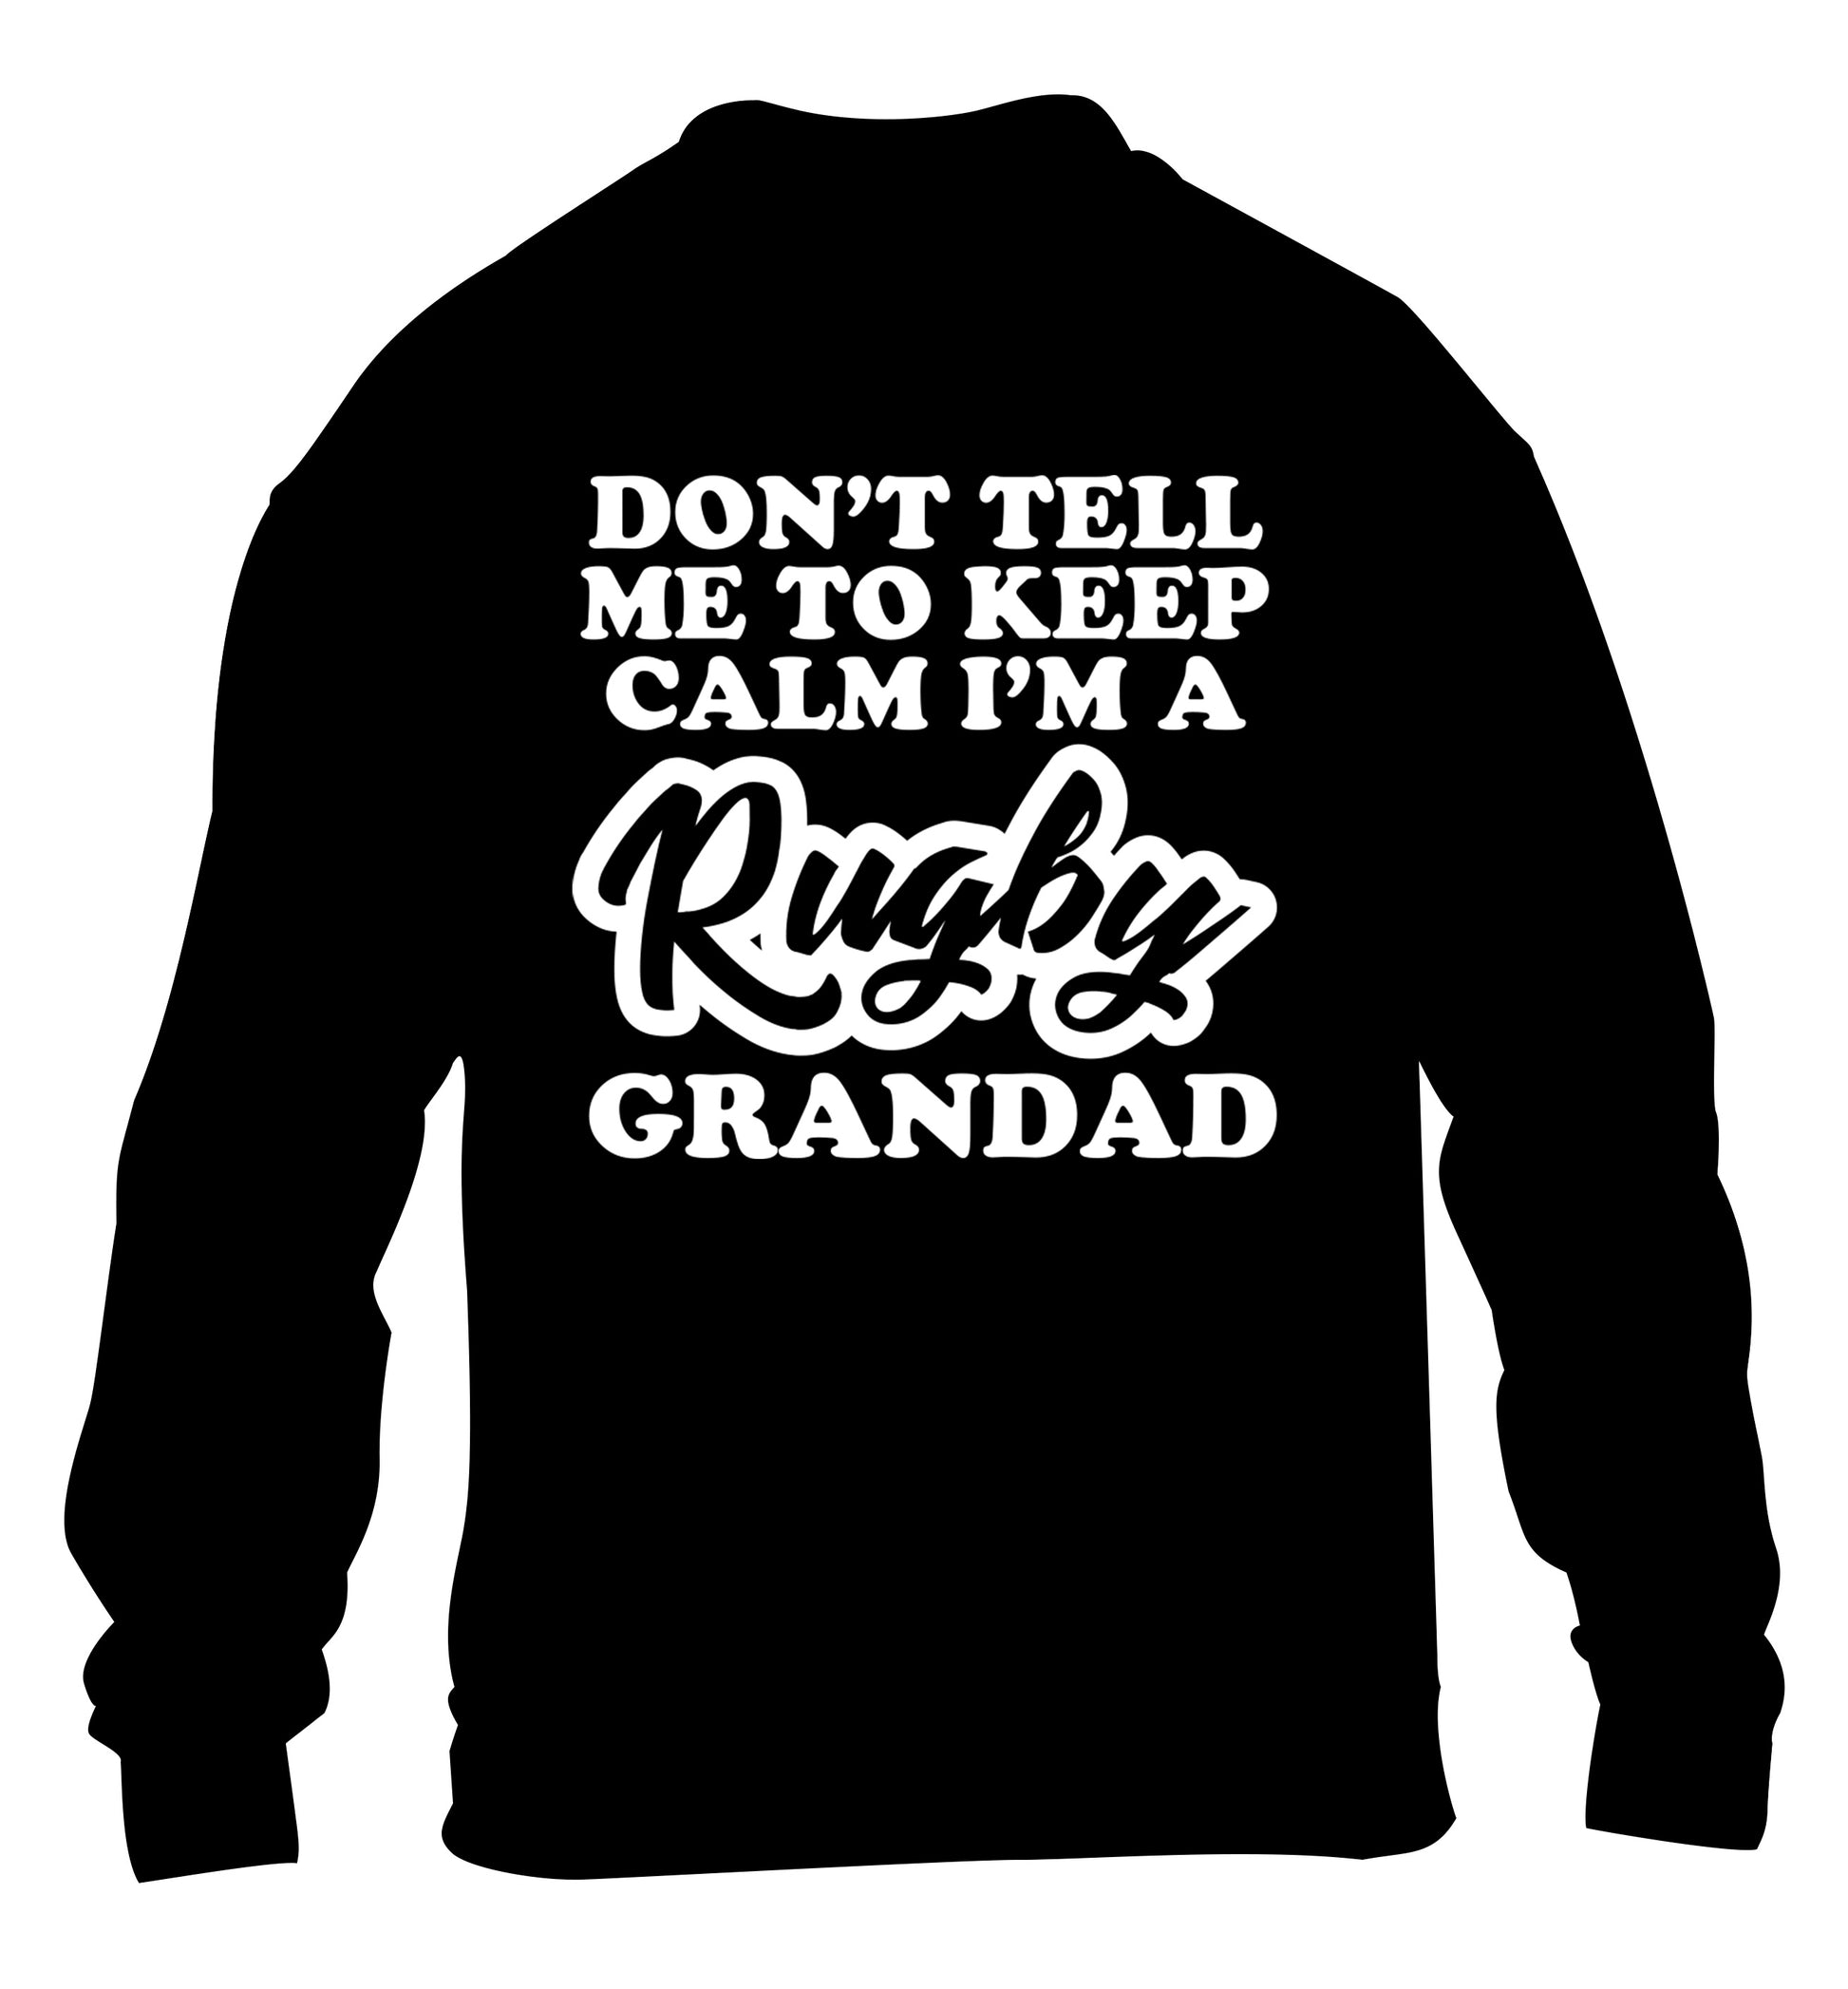 Don't tell me to keep calm I'm a rugby dad children's black sweater 12-13 Years